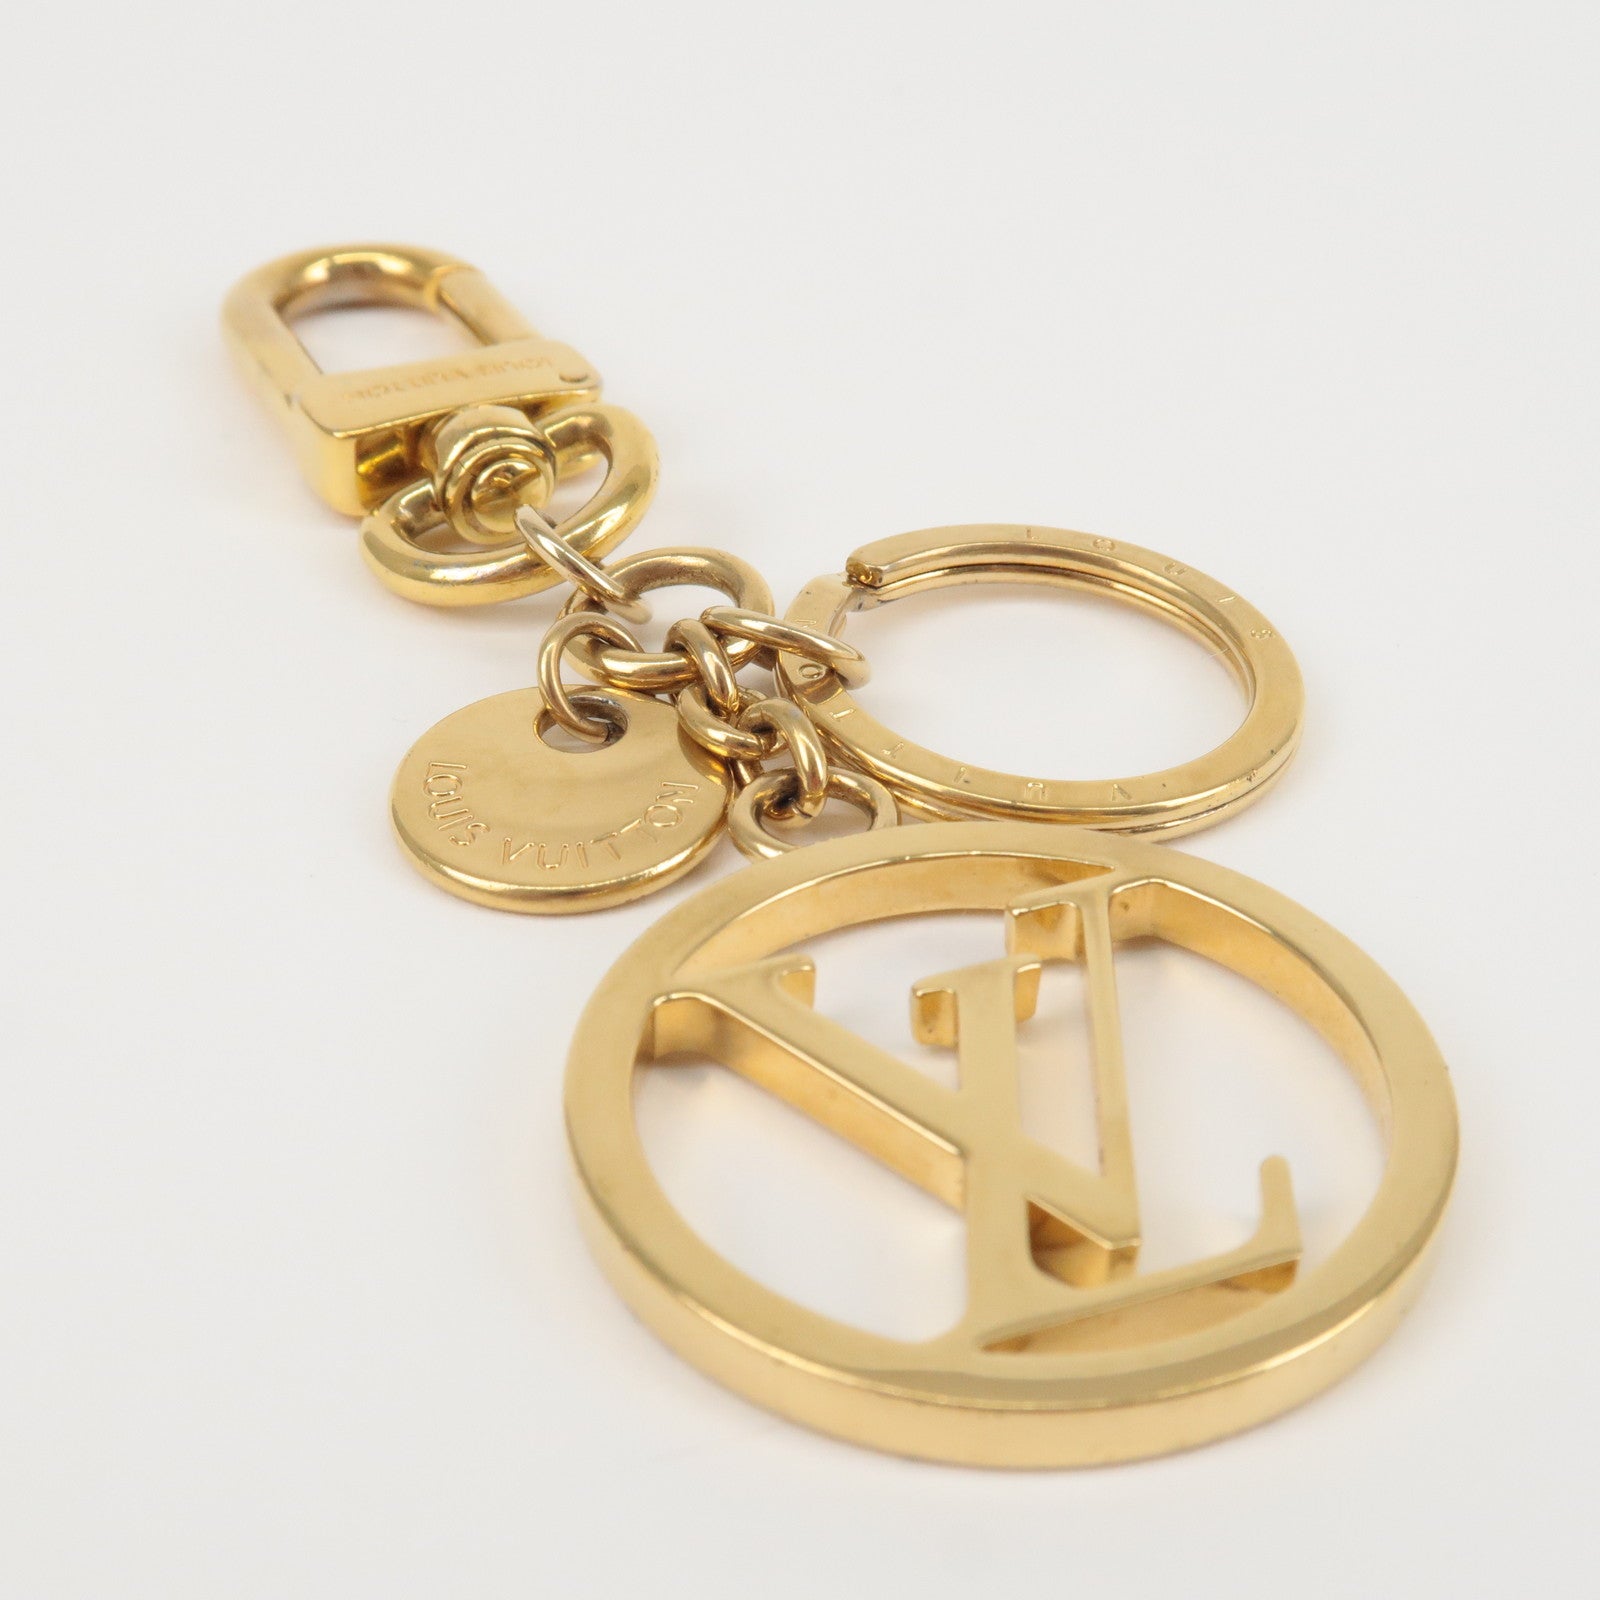 Louis Vuitton Key Ring Holder Charm Malletier Vintage used from JAPAN